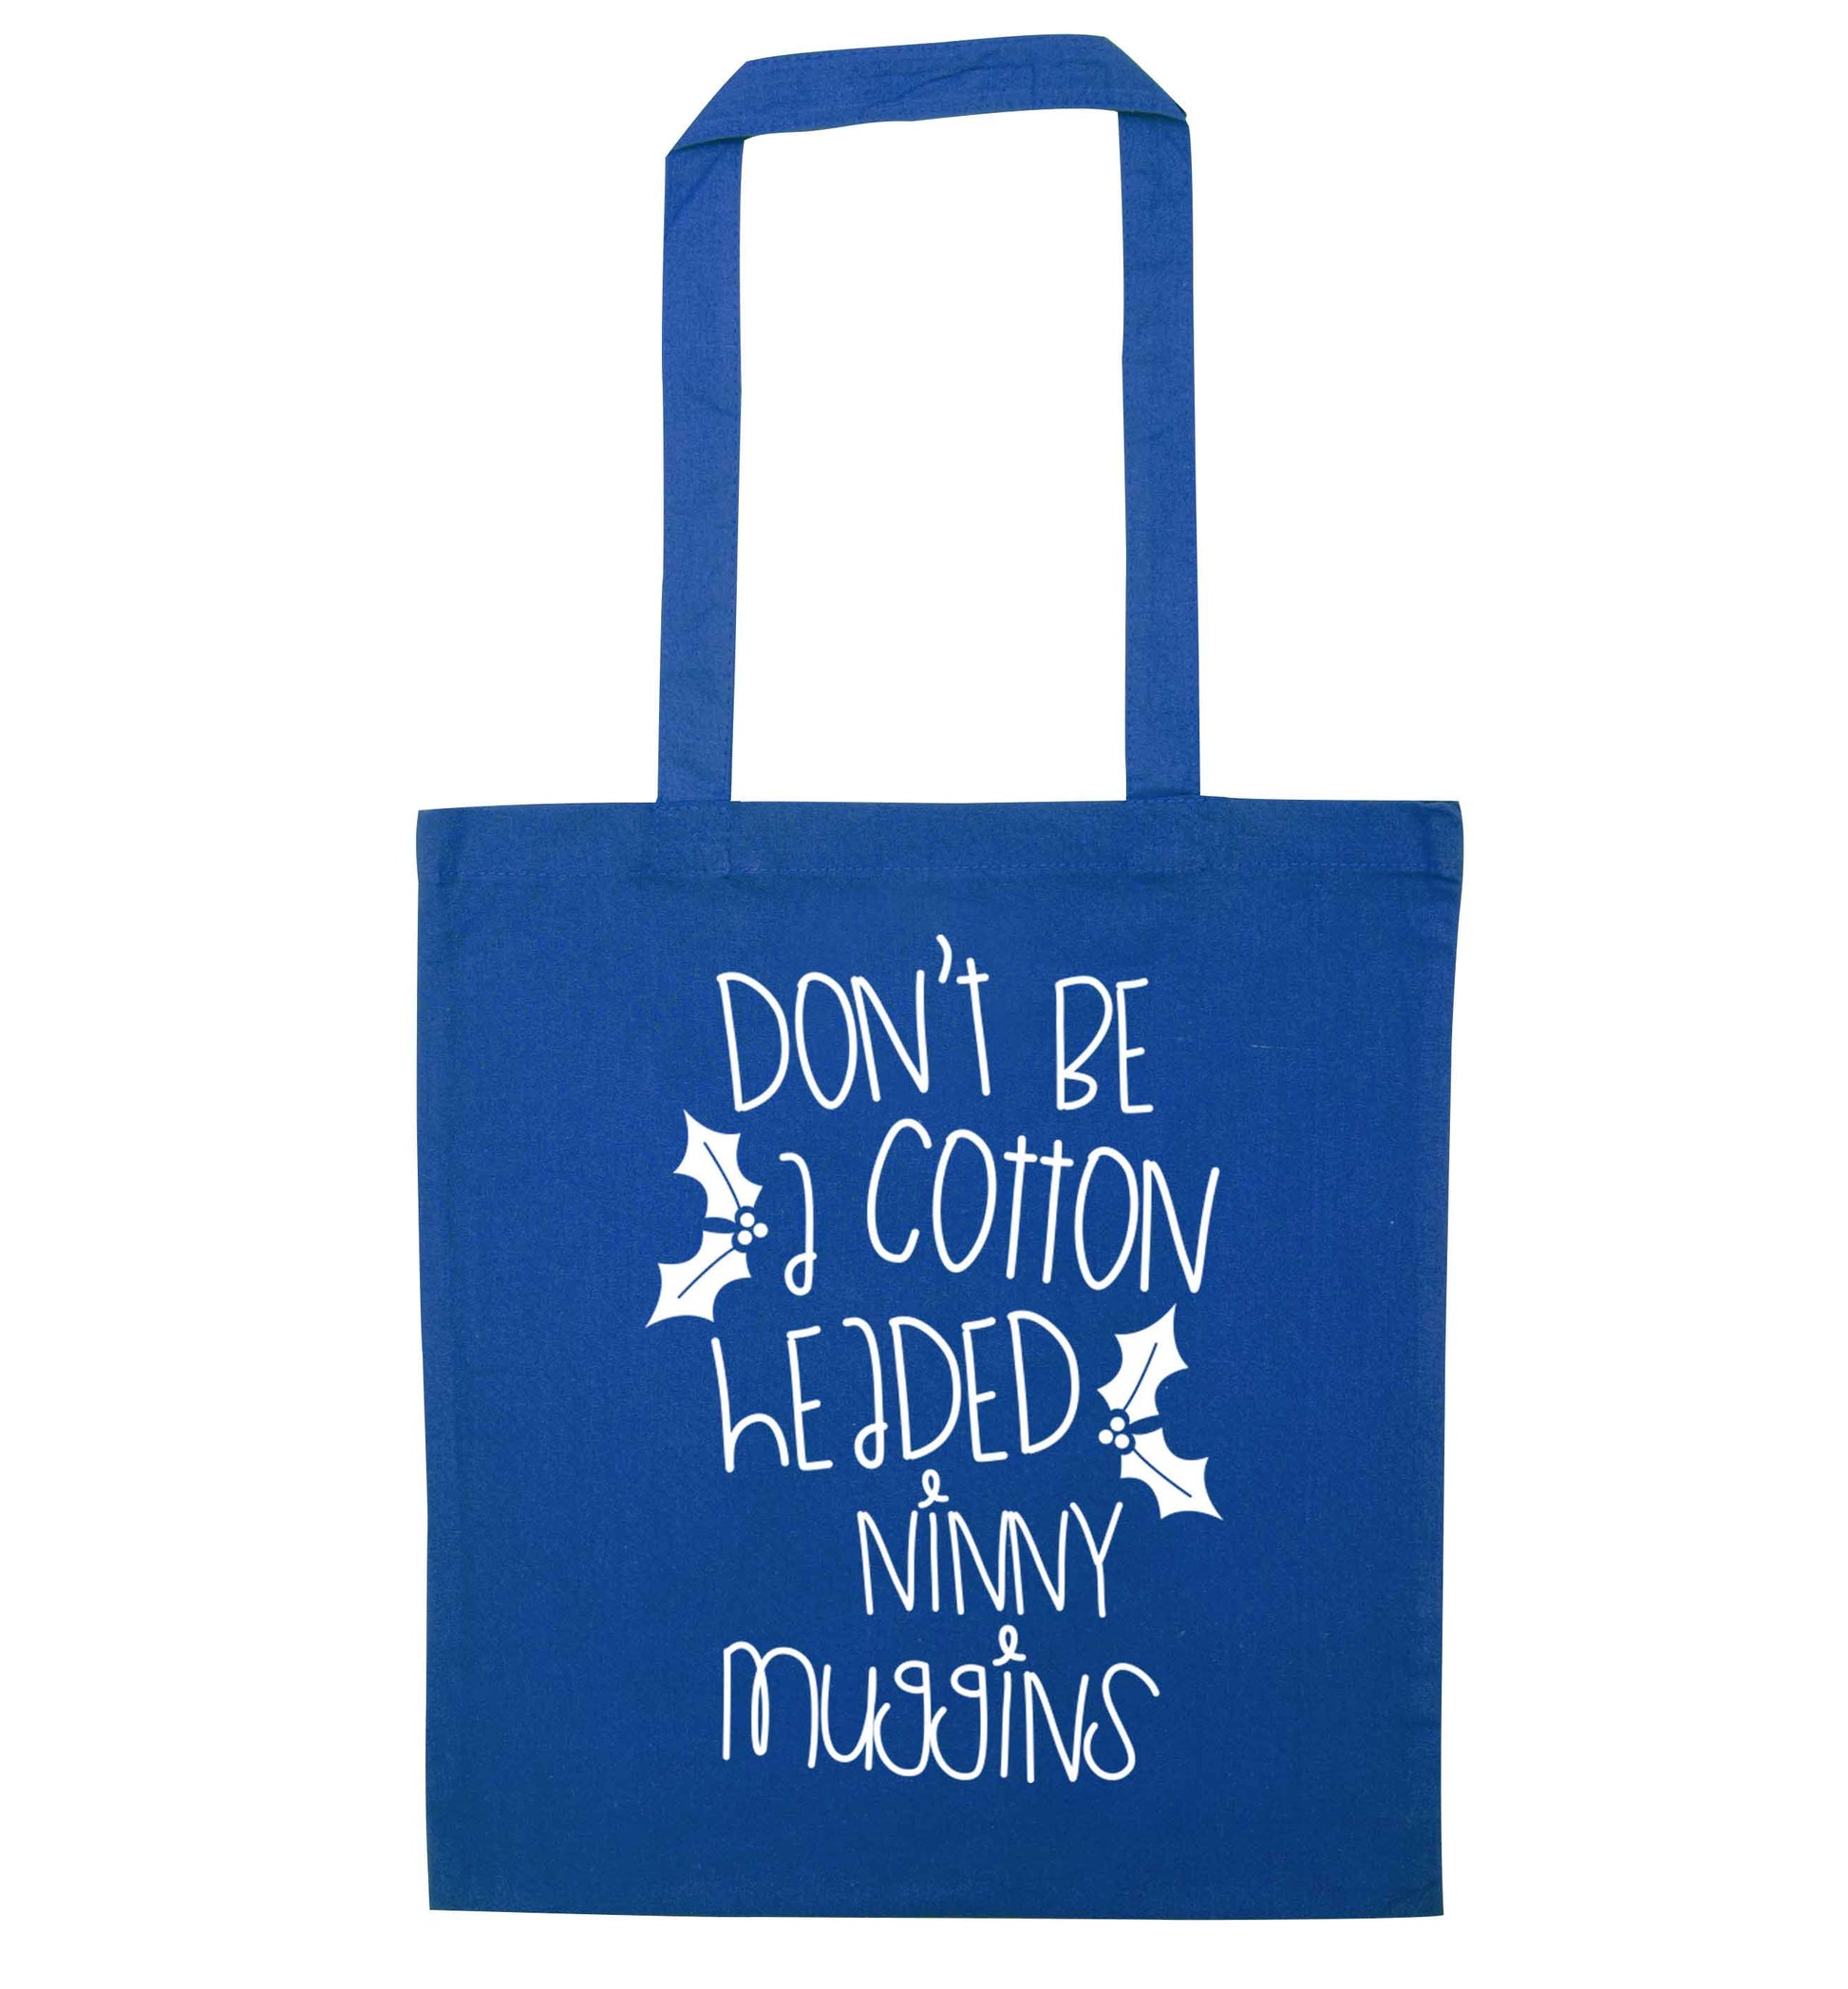 Too Late to be Good blue tote bag